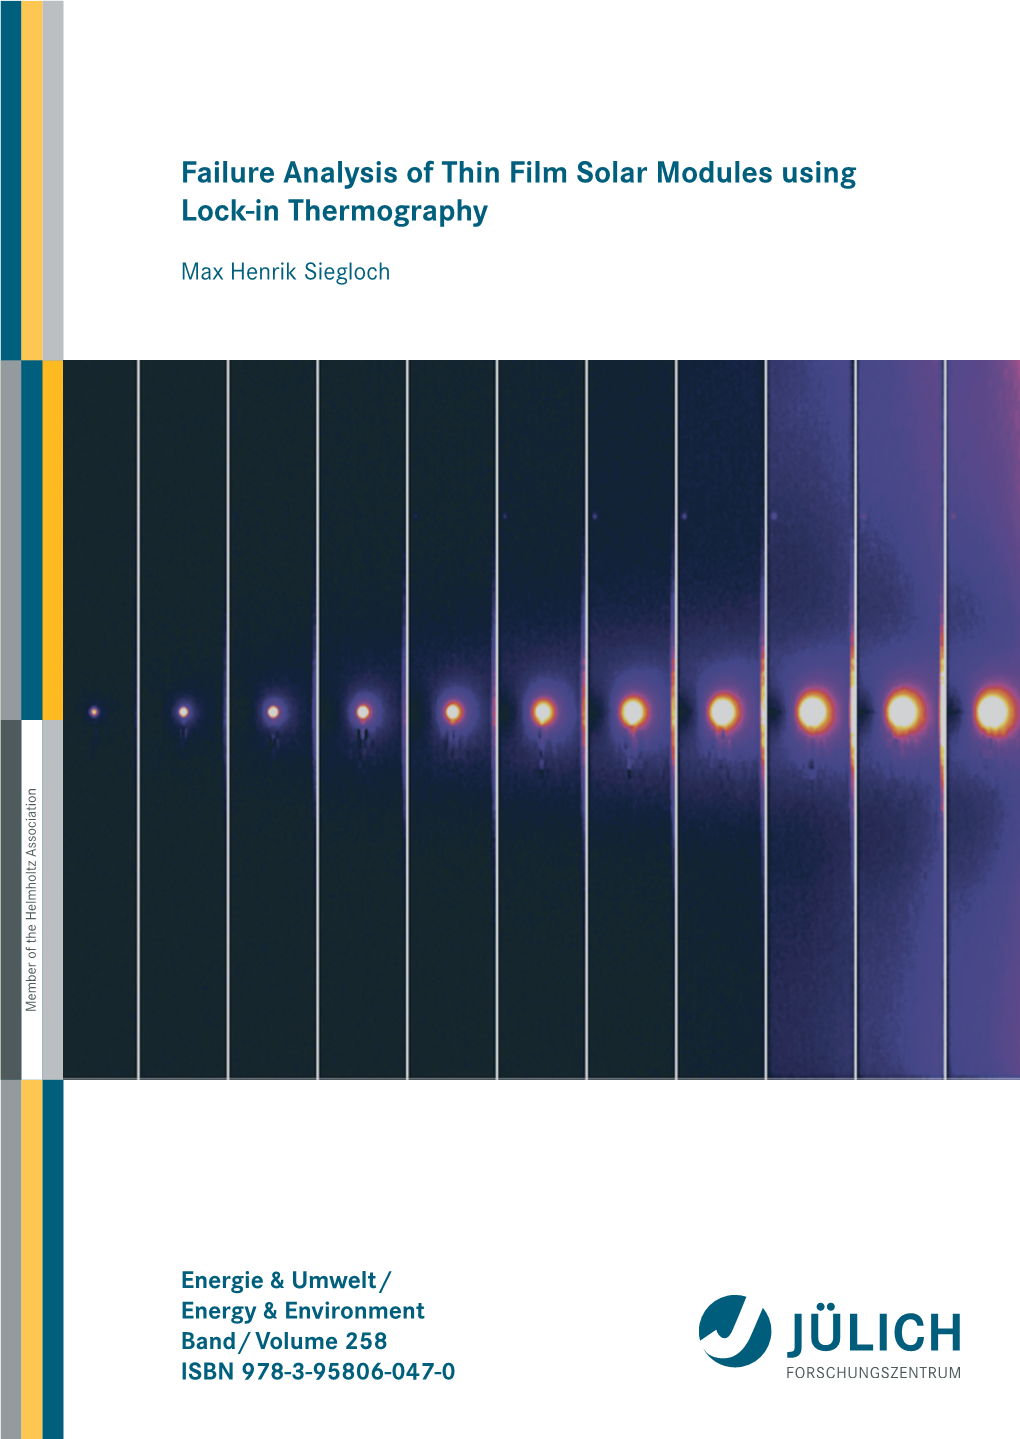 Failure Analysis of Thin Film Solar Modules Using Lock-In Thermography